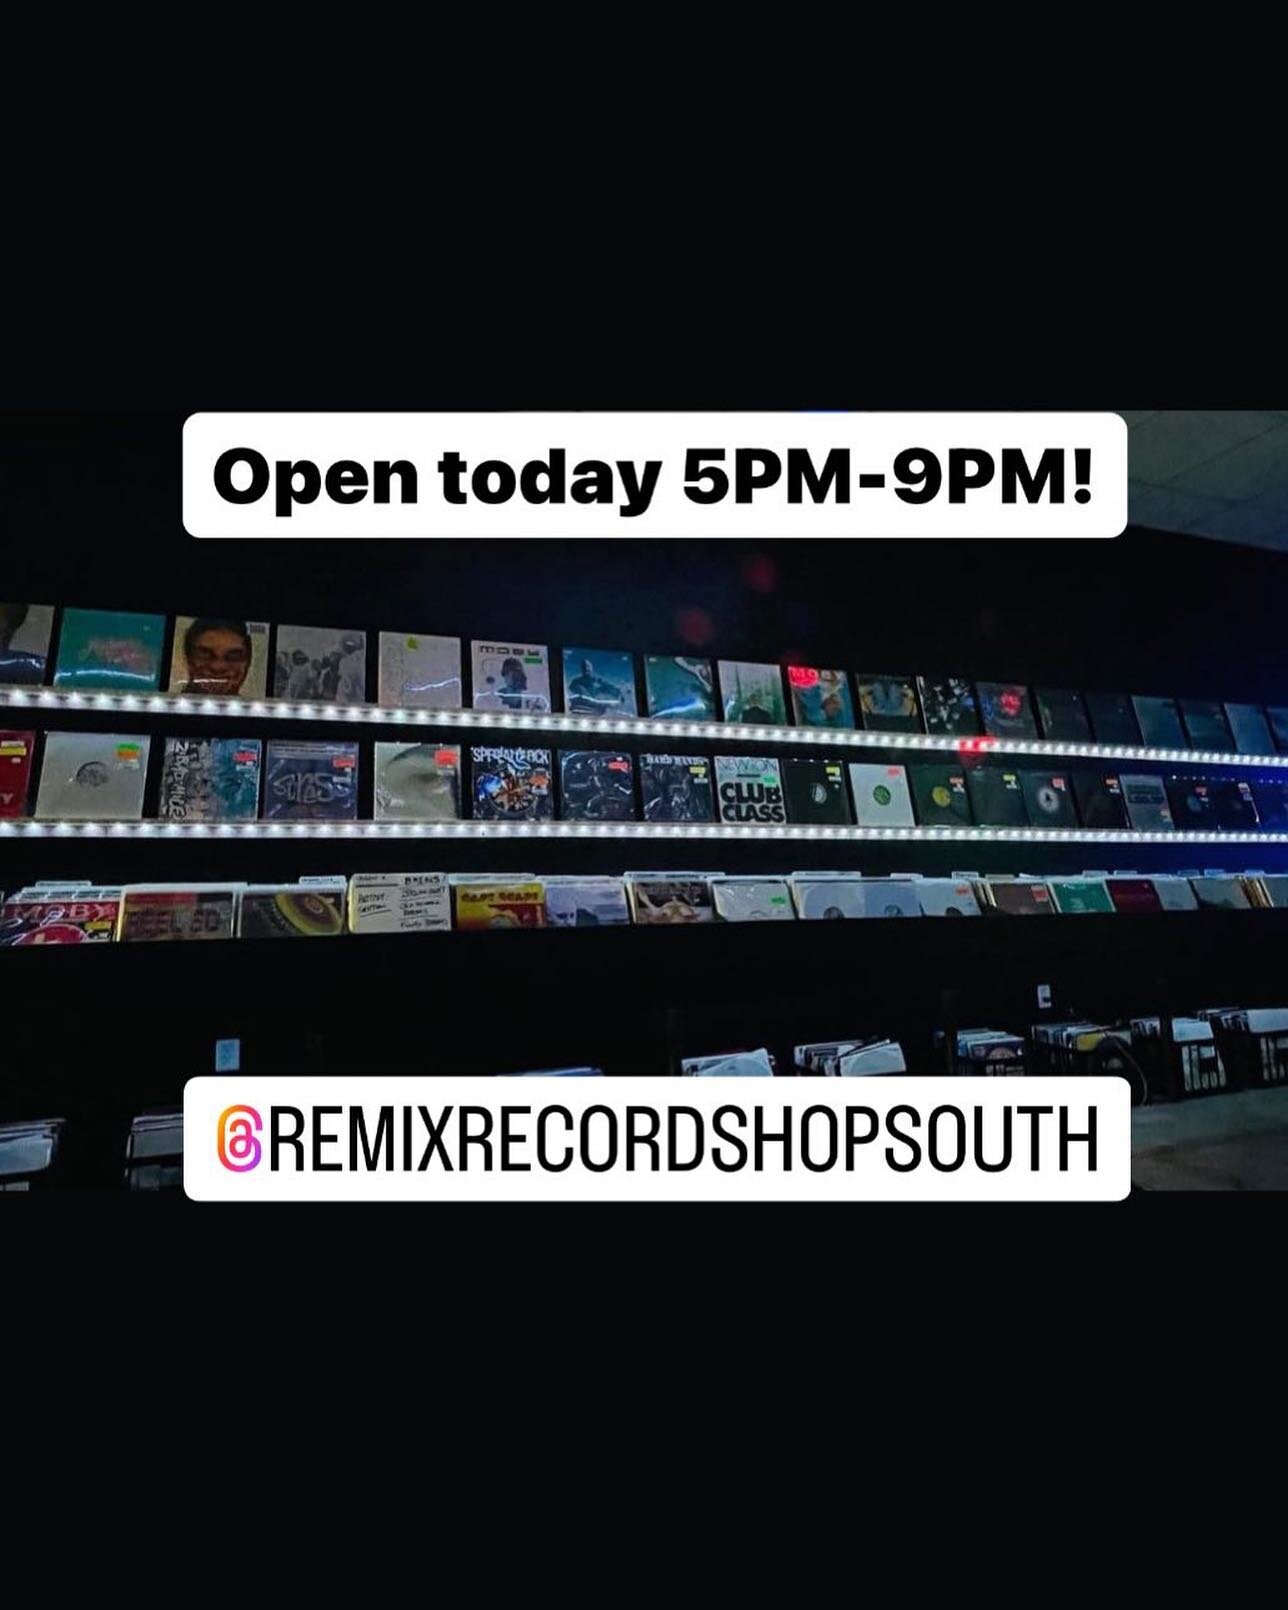 Thursday / Open today 5PM-9PM! @dabl407 is your host. 
Come get your dig on.🎧✨ @remixrecordshopsouth @mills50district